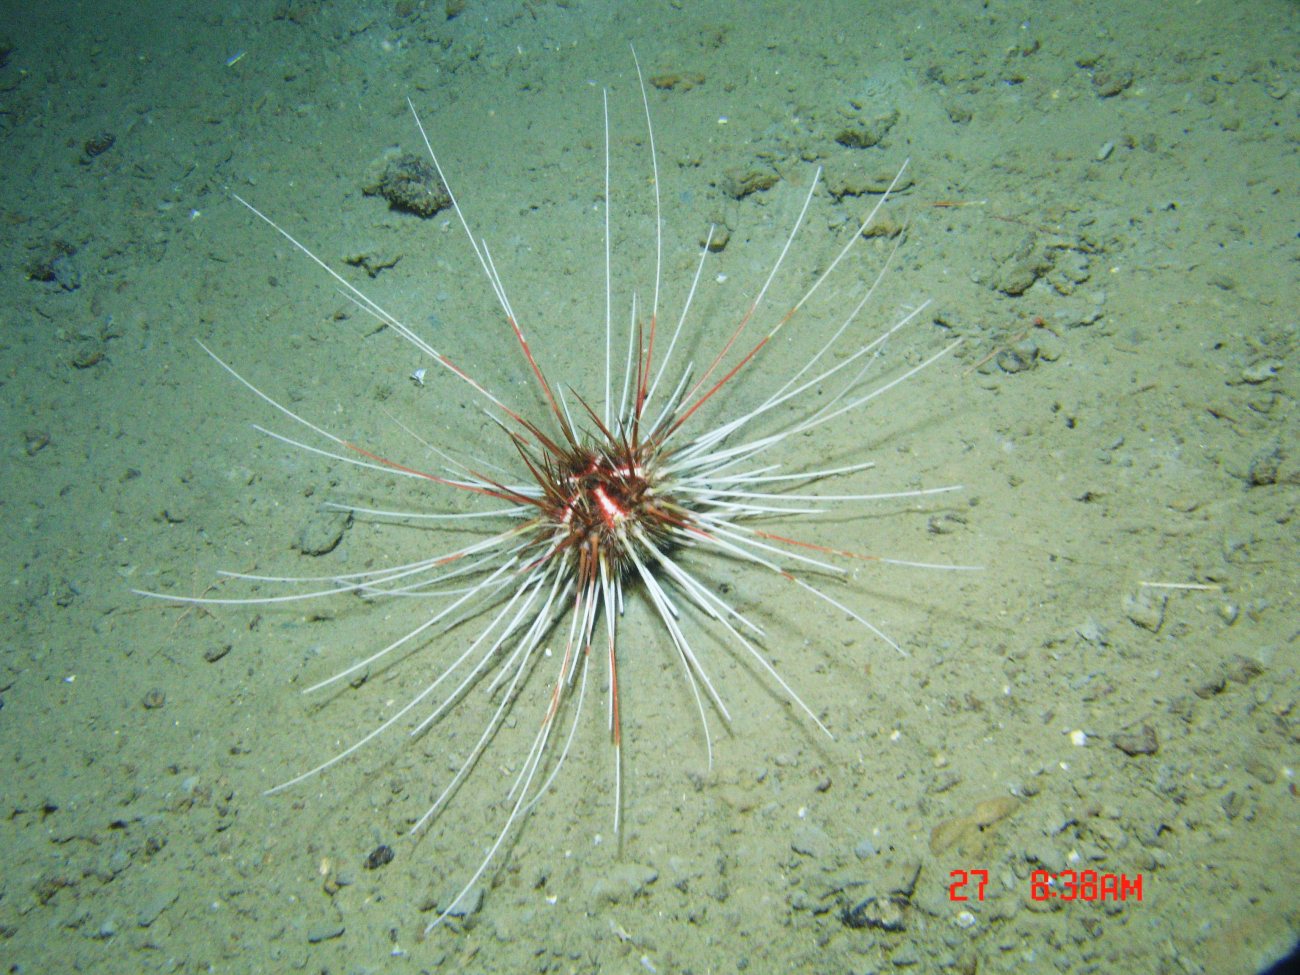 A large red and white urchin with very long spines (Coelopleurus floridanus)